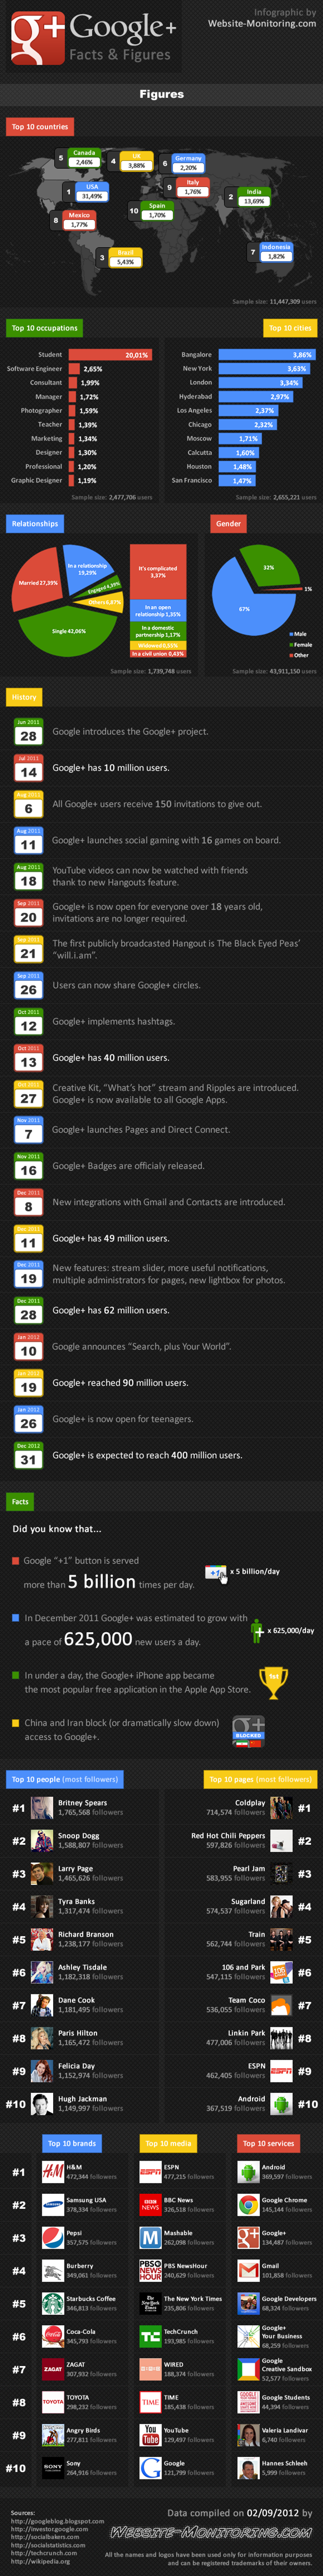 Google+, the numbers